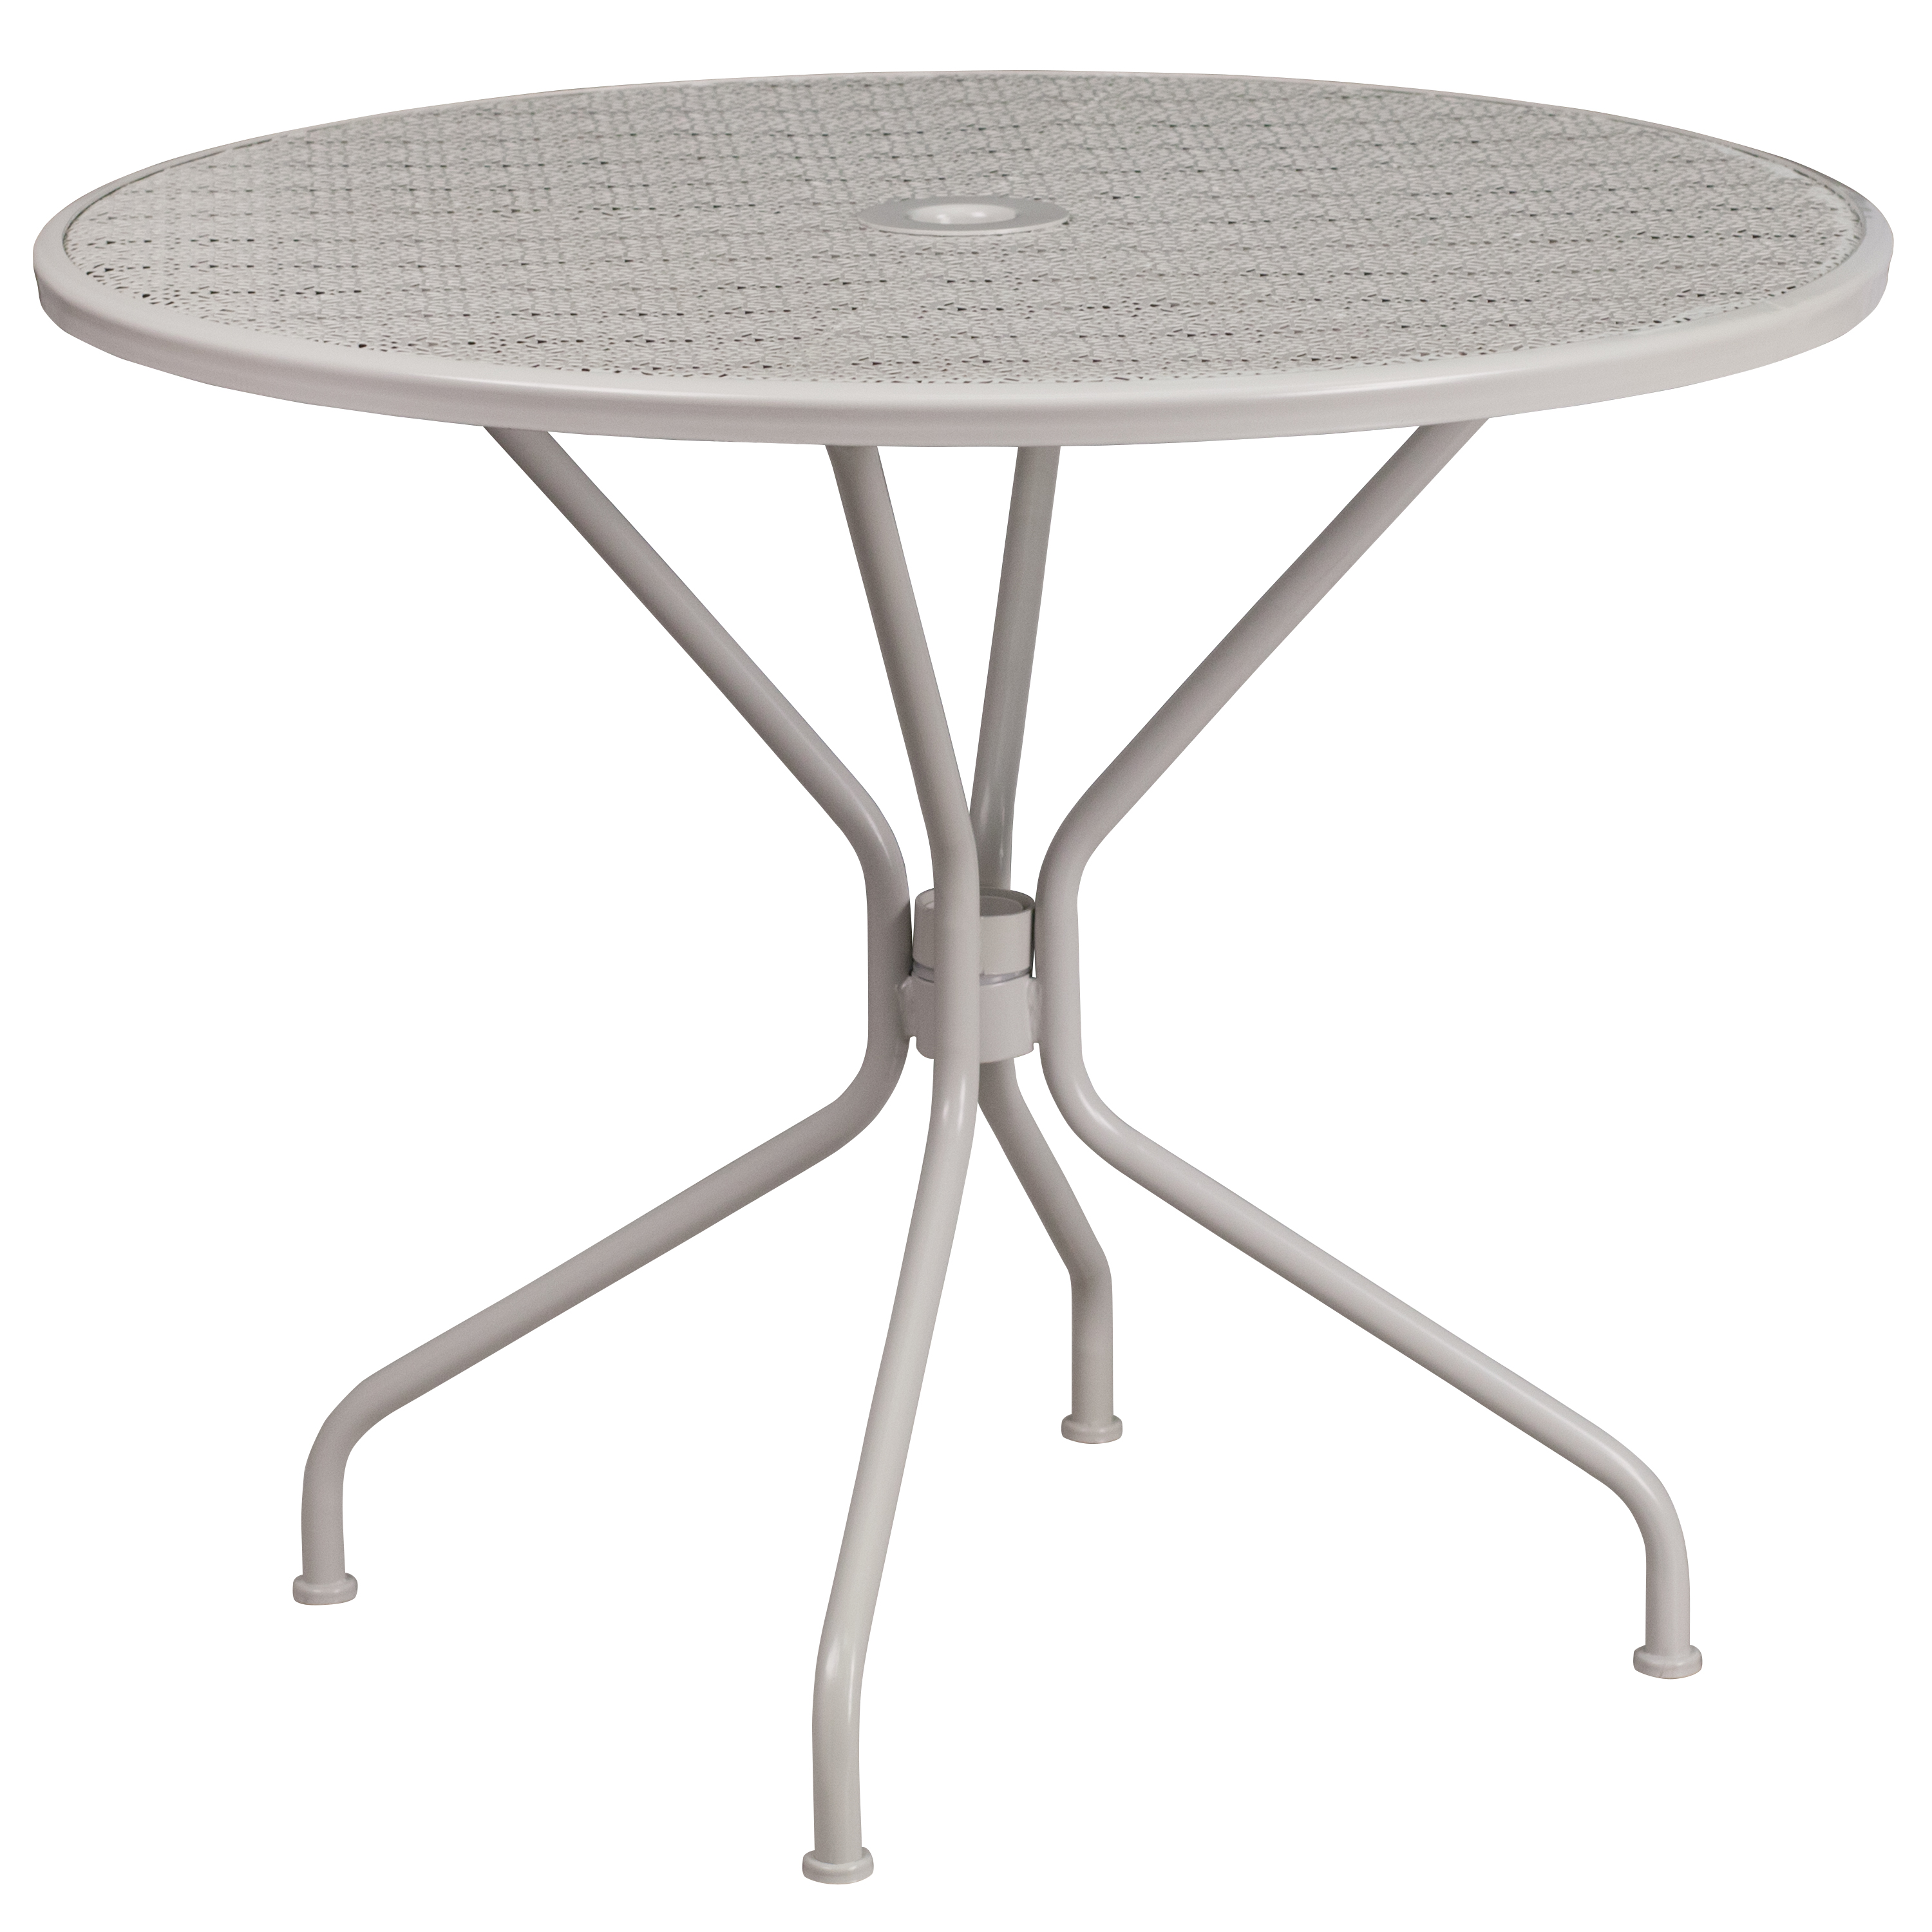 Flash Furniture Commercial Grade 35.25" Round Light Gray Indoor-Outdoor Steel Patio Table Set with 4 Square Back Chairs - image 4 of 5